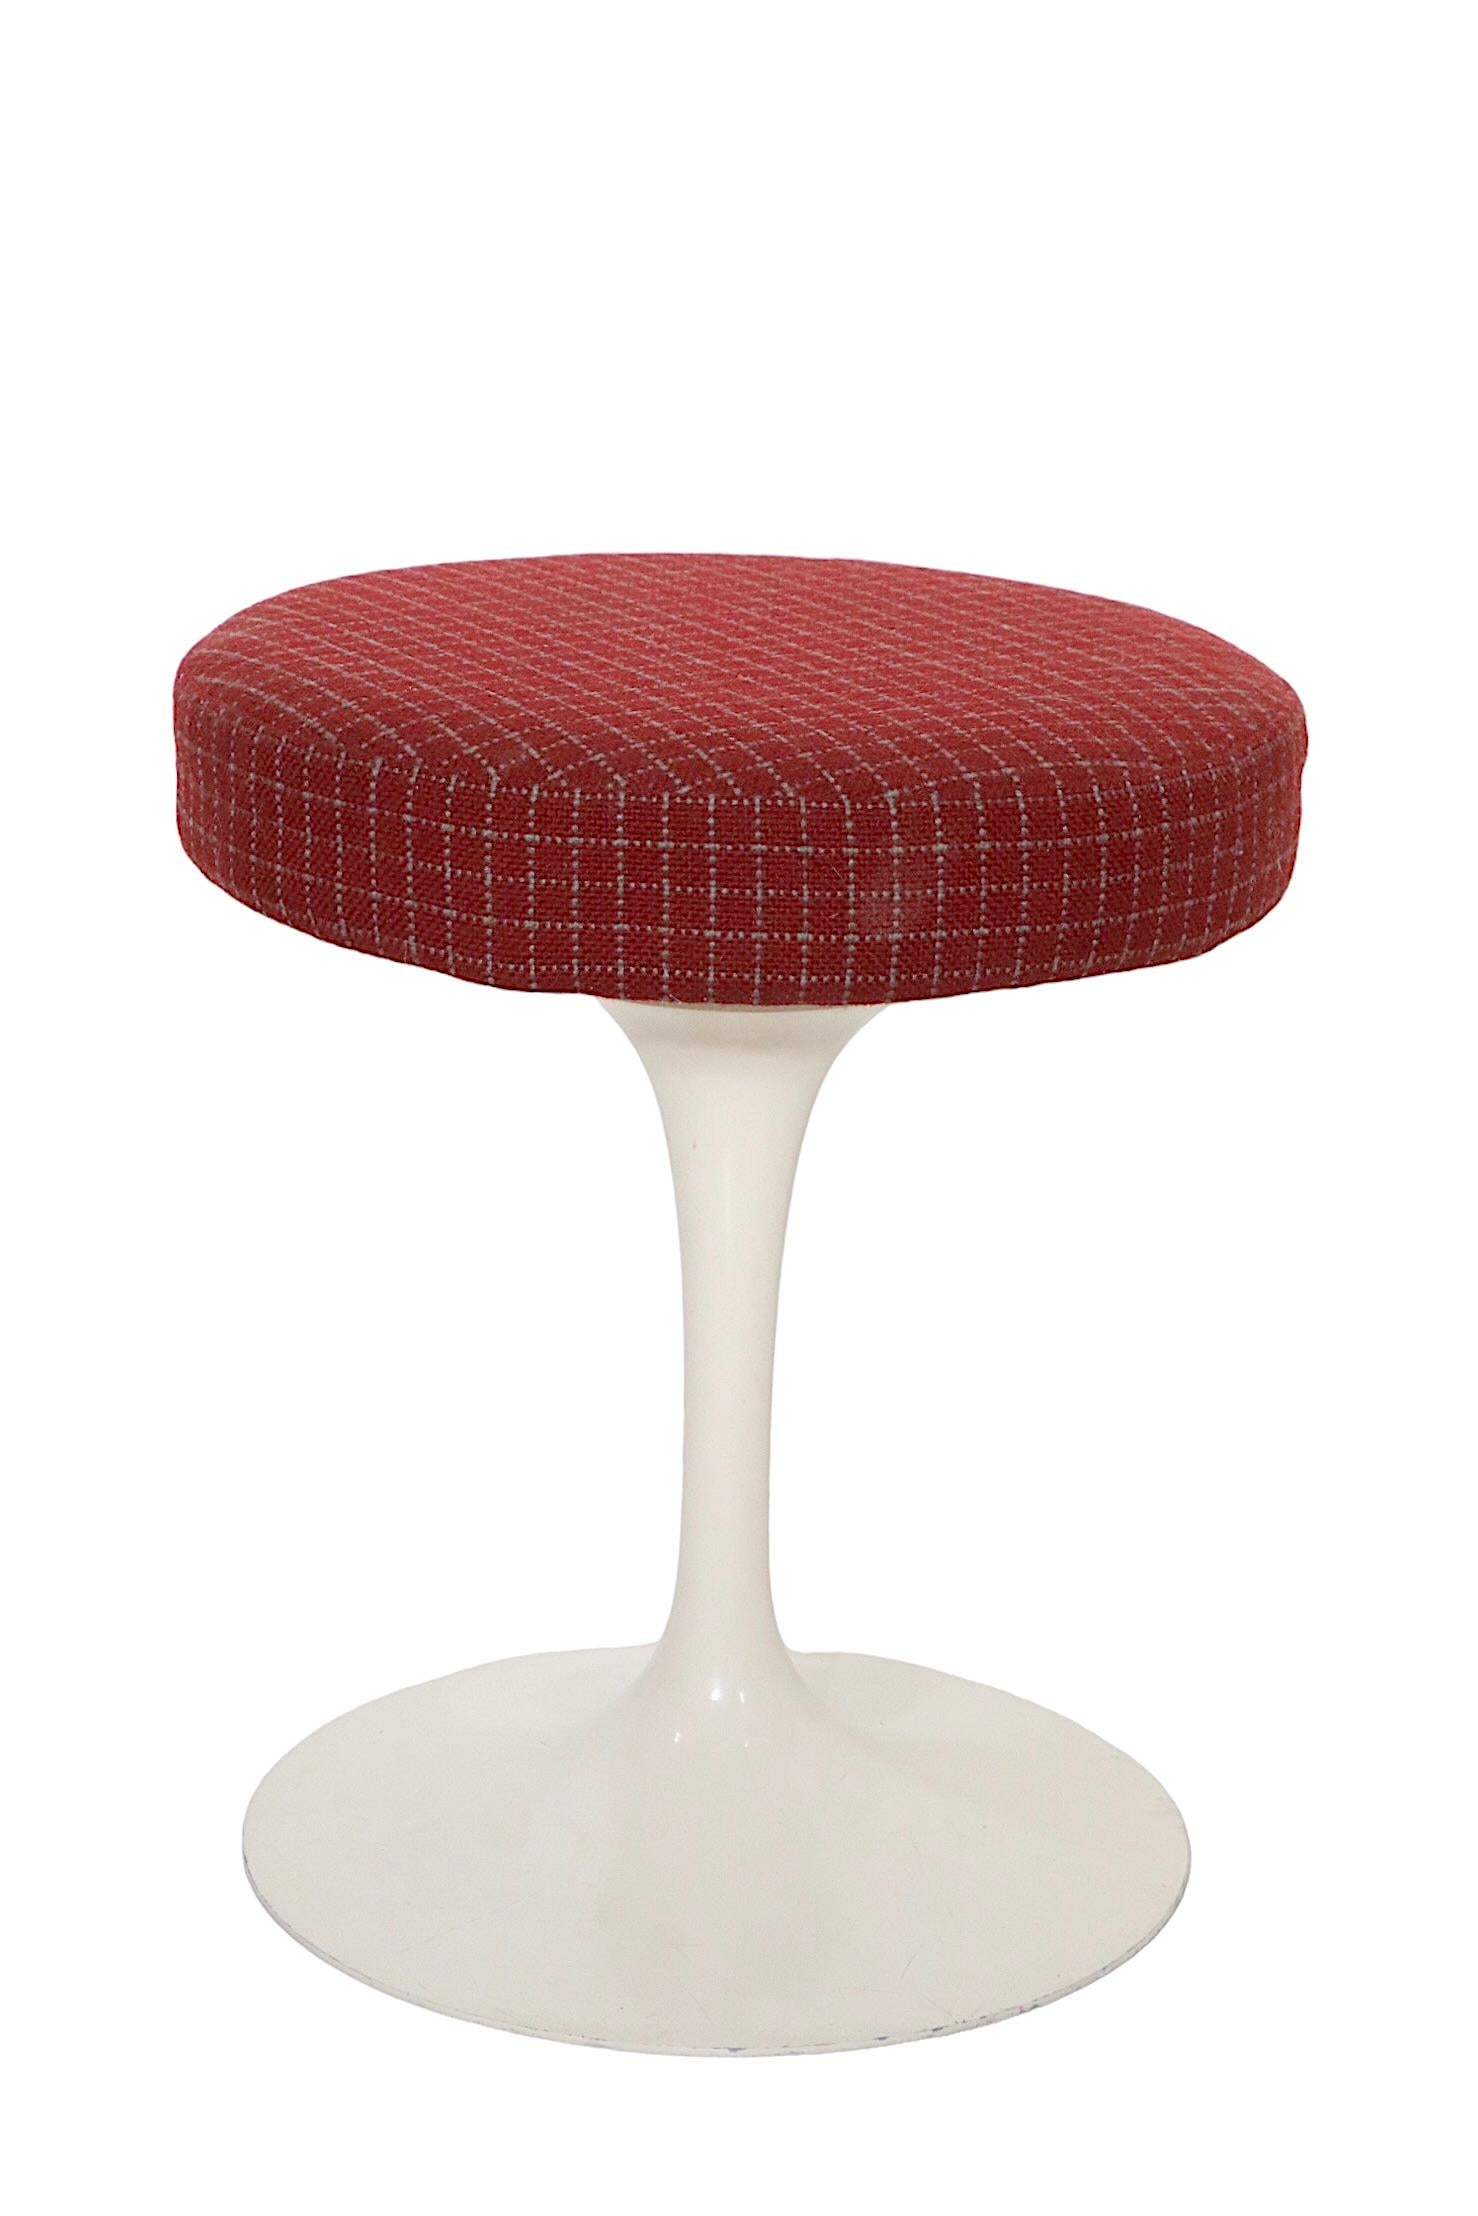 American Pr. Tulip Style Stools Designed by Saarinen for Knoll, circa 1970s-1980s